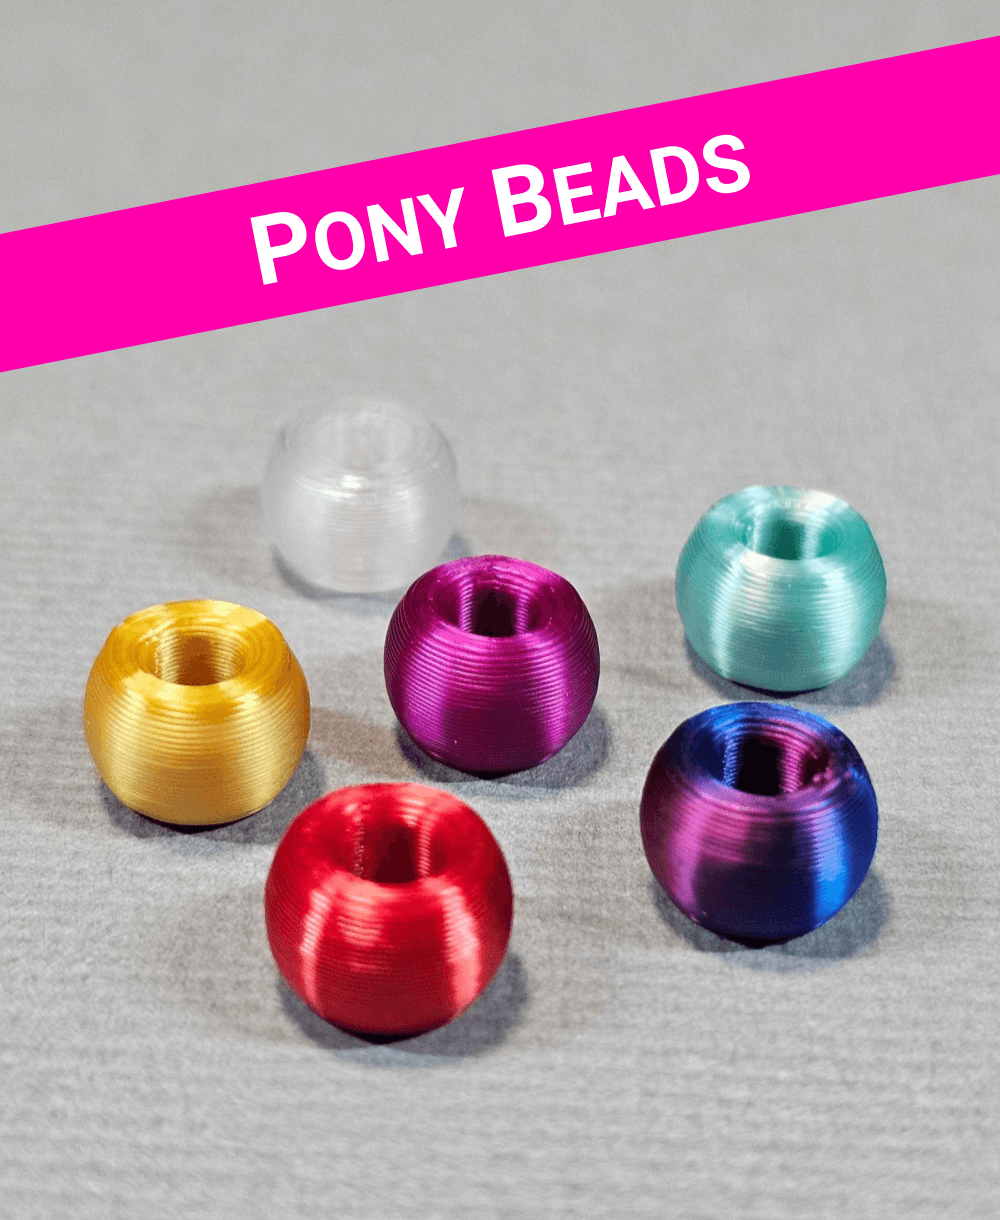 Pony bead | Standard 6mm x 9mm | Beads for friendship bracelets and other beaded crafts! 3d model